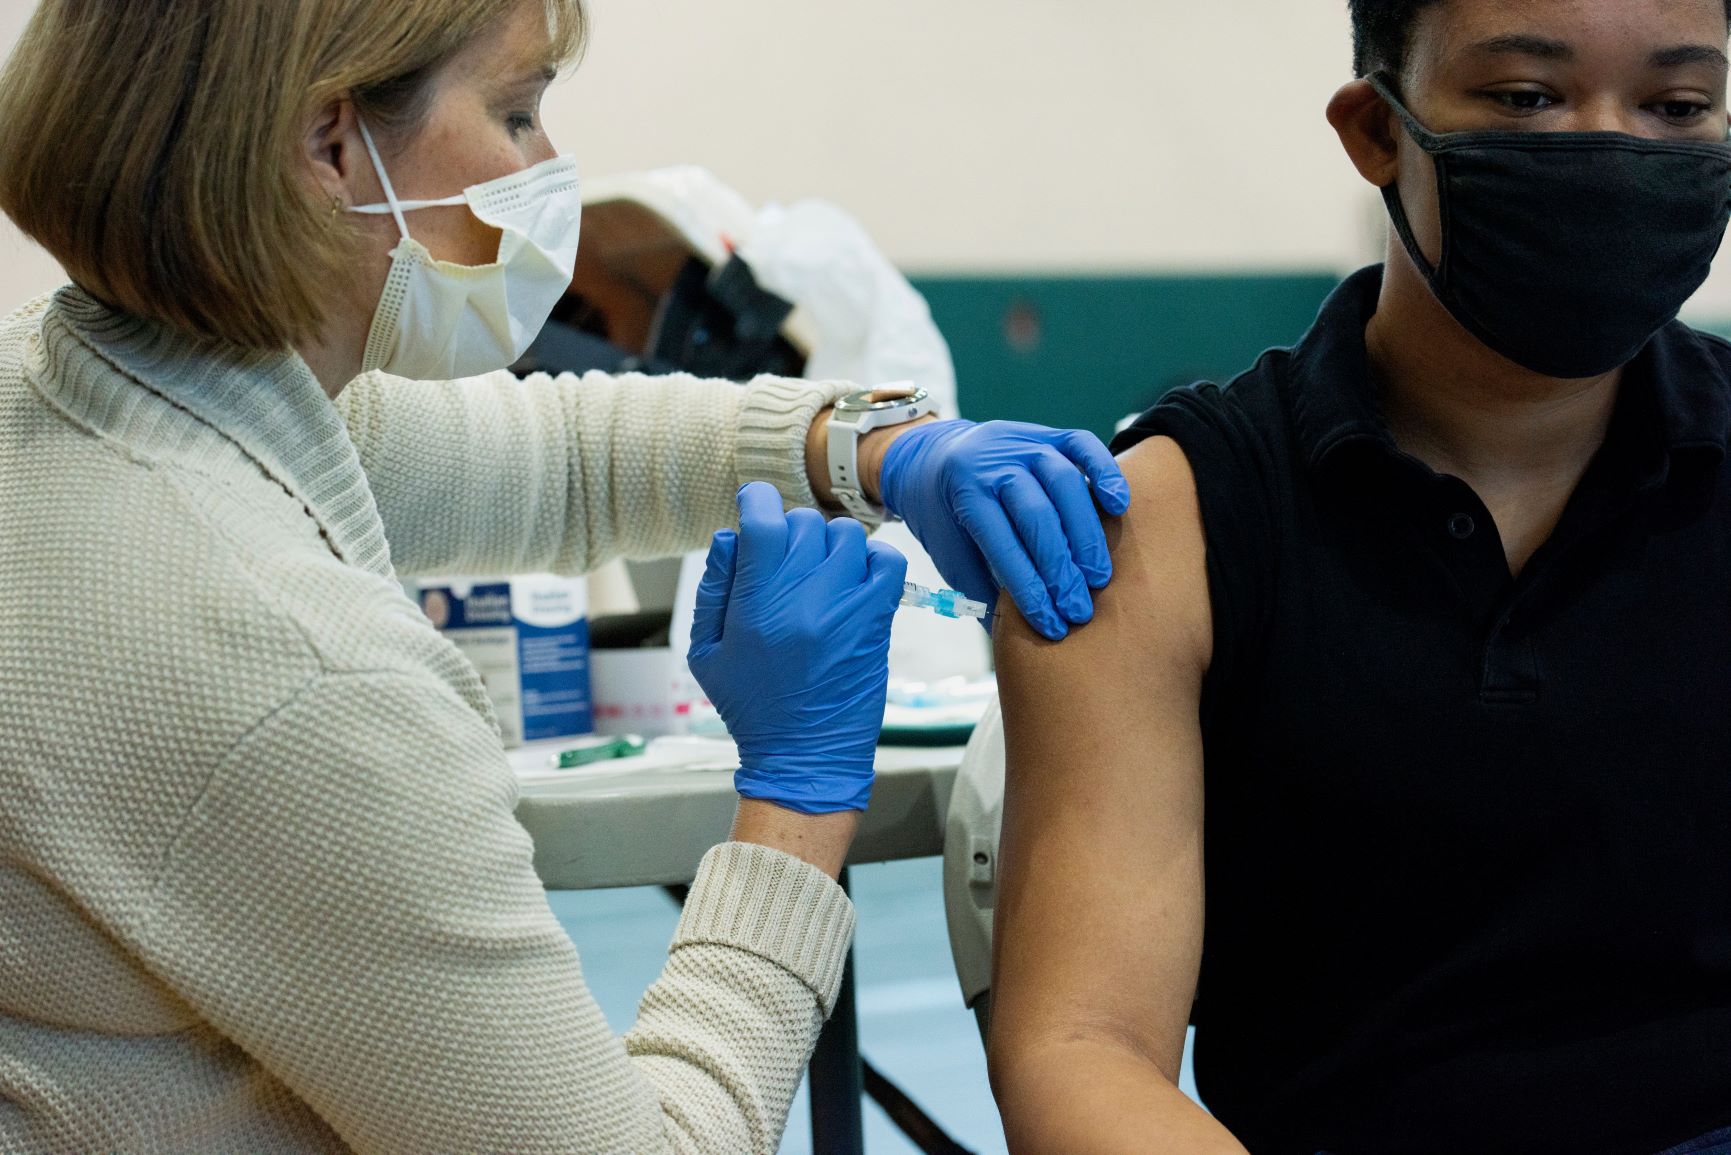 a student gets a COVID-19 vaccine, for 2021 Year in Review